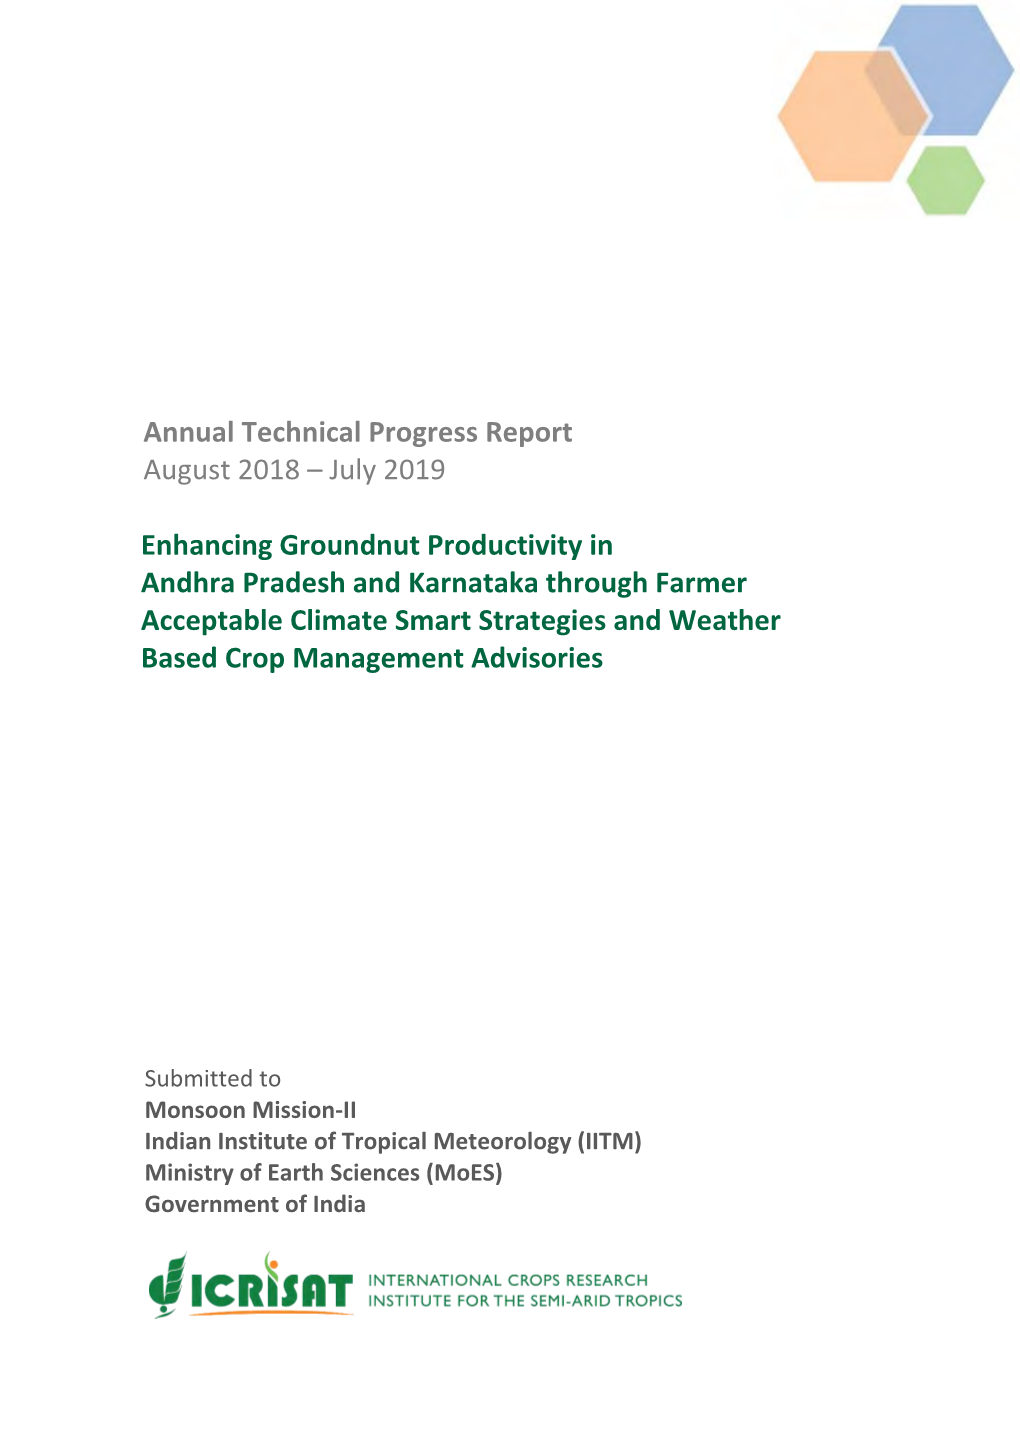 Annual Technical Progress Report August 2018 – July 2019